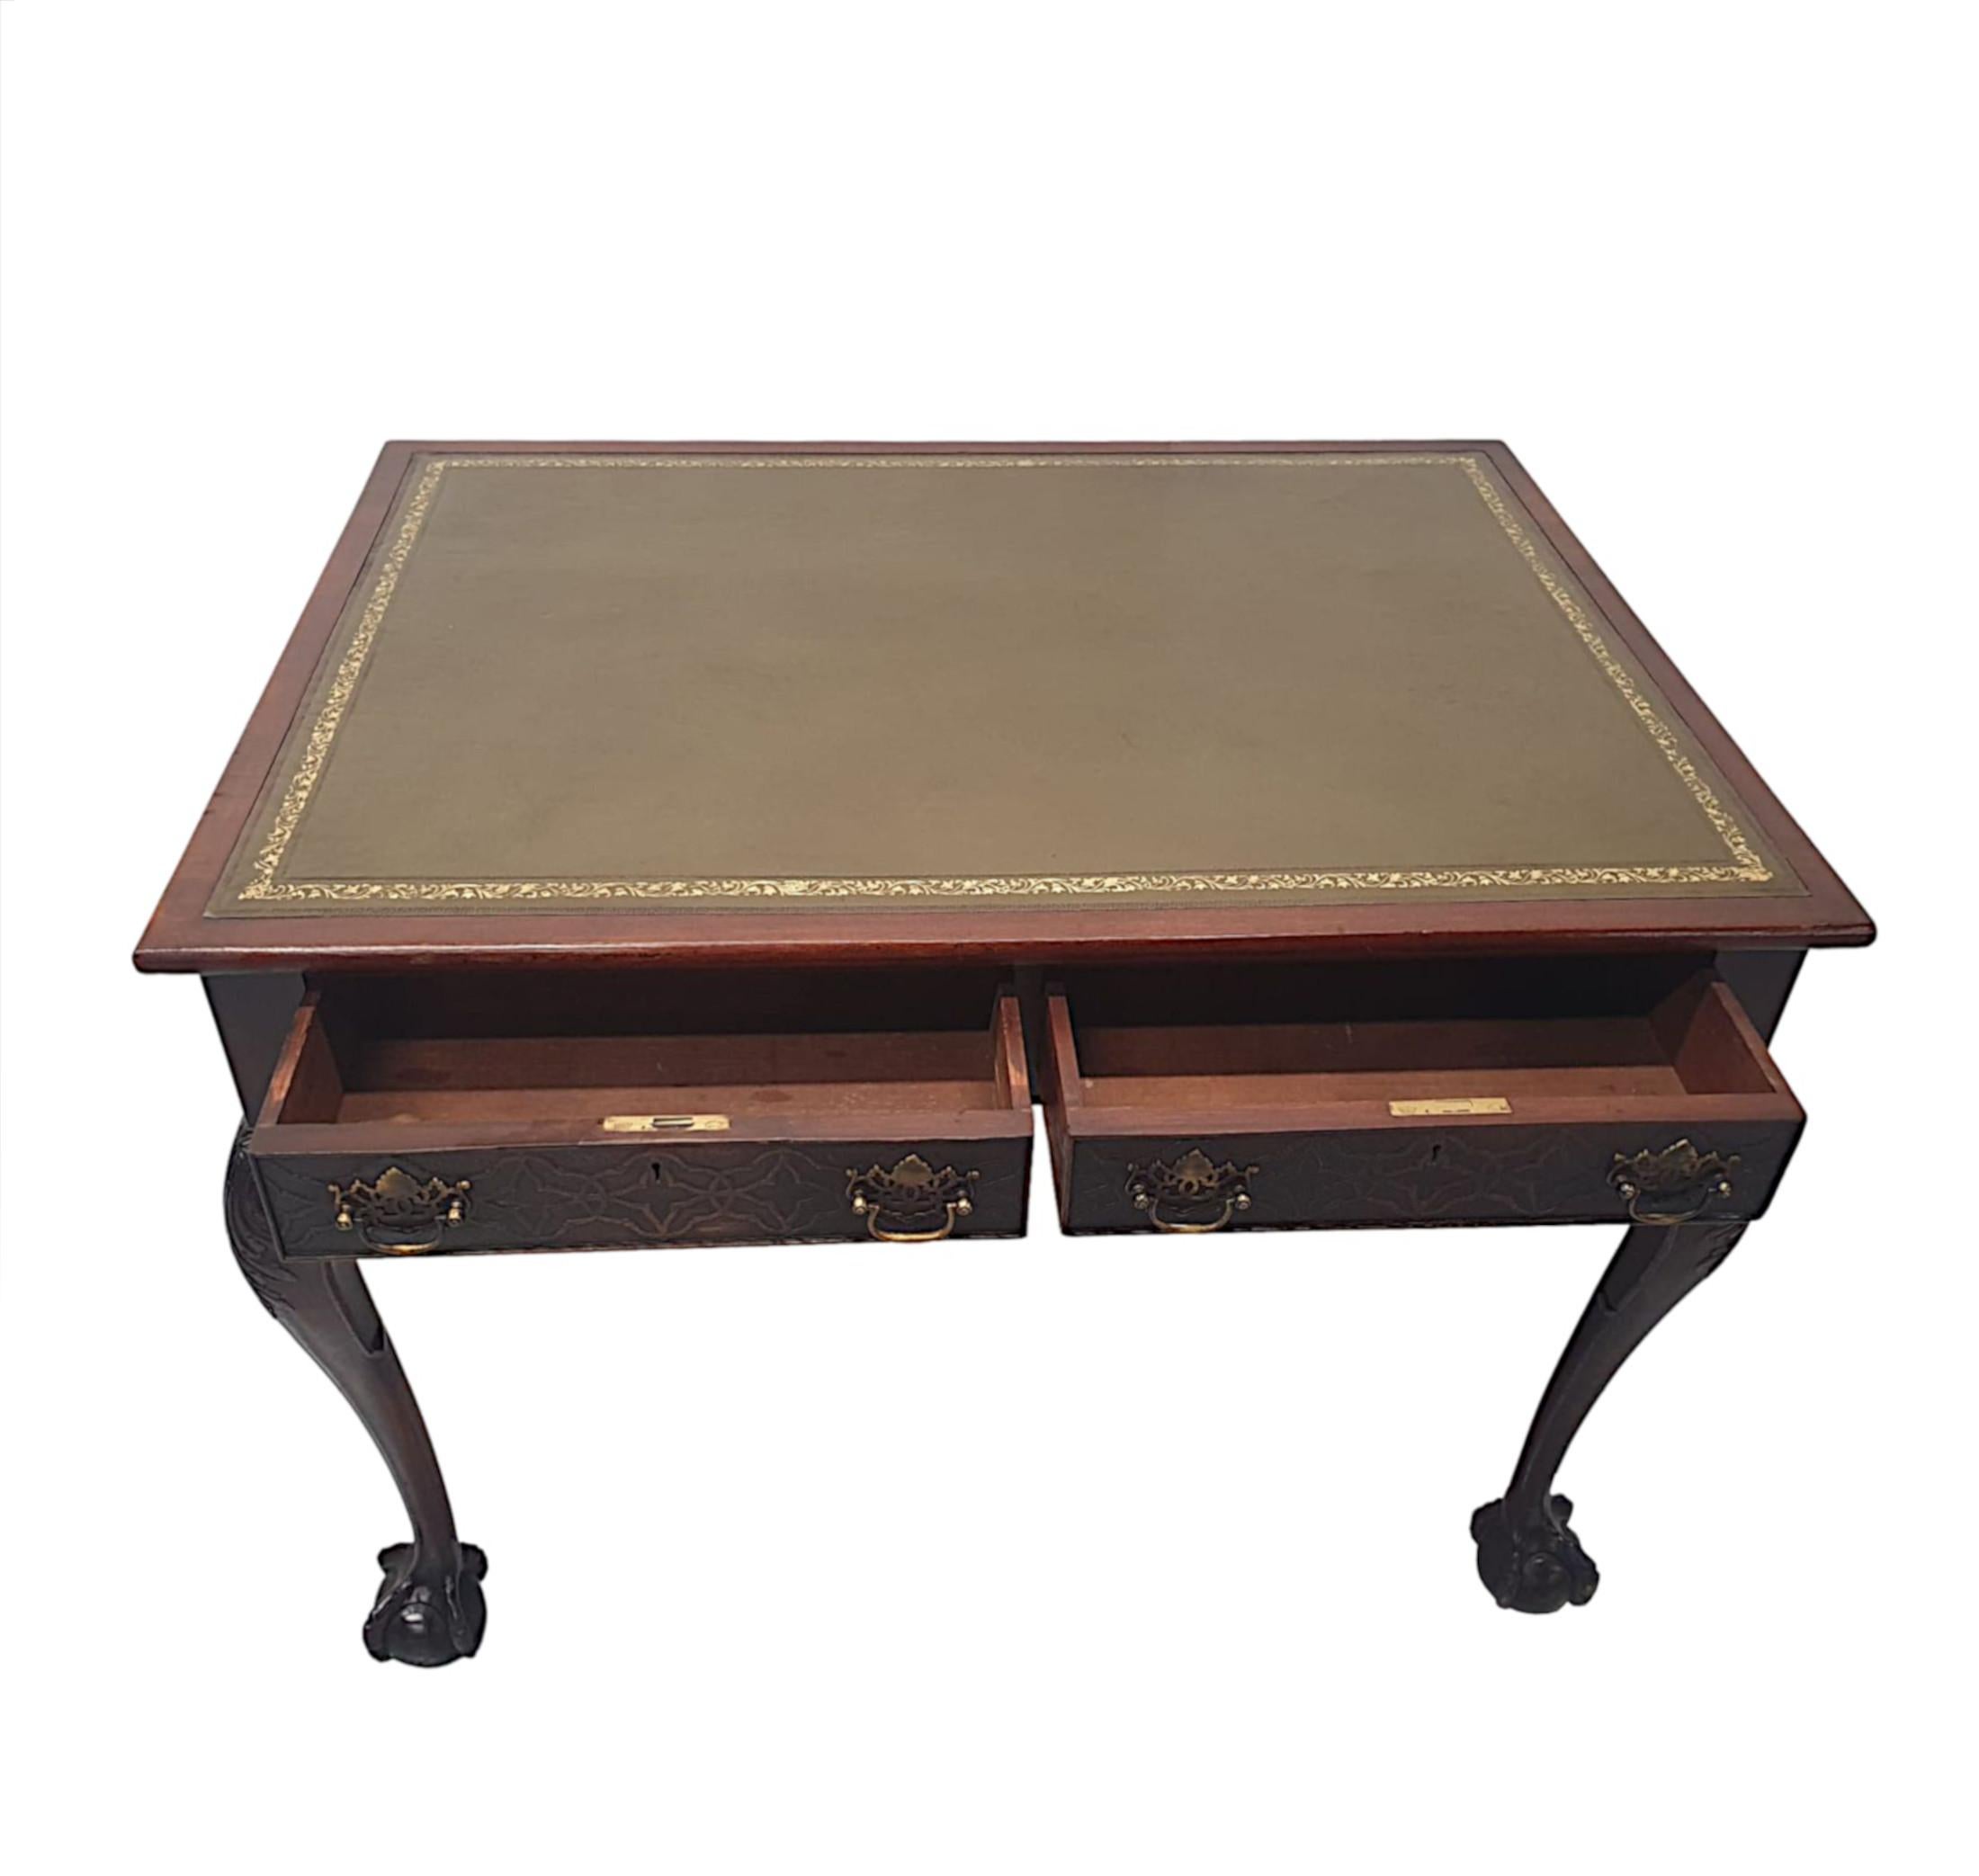 Stunning Late 19th Century Desk in the Thomas Chippendale Manner For Sale 7